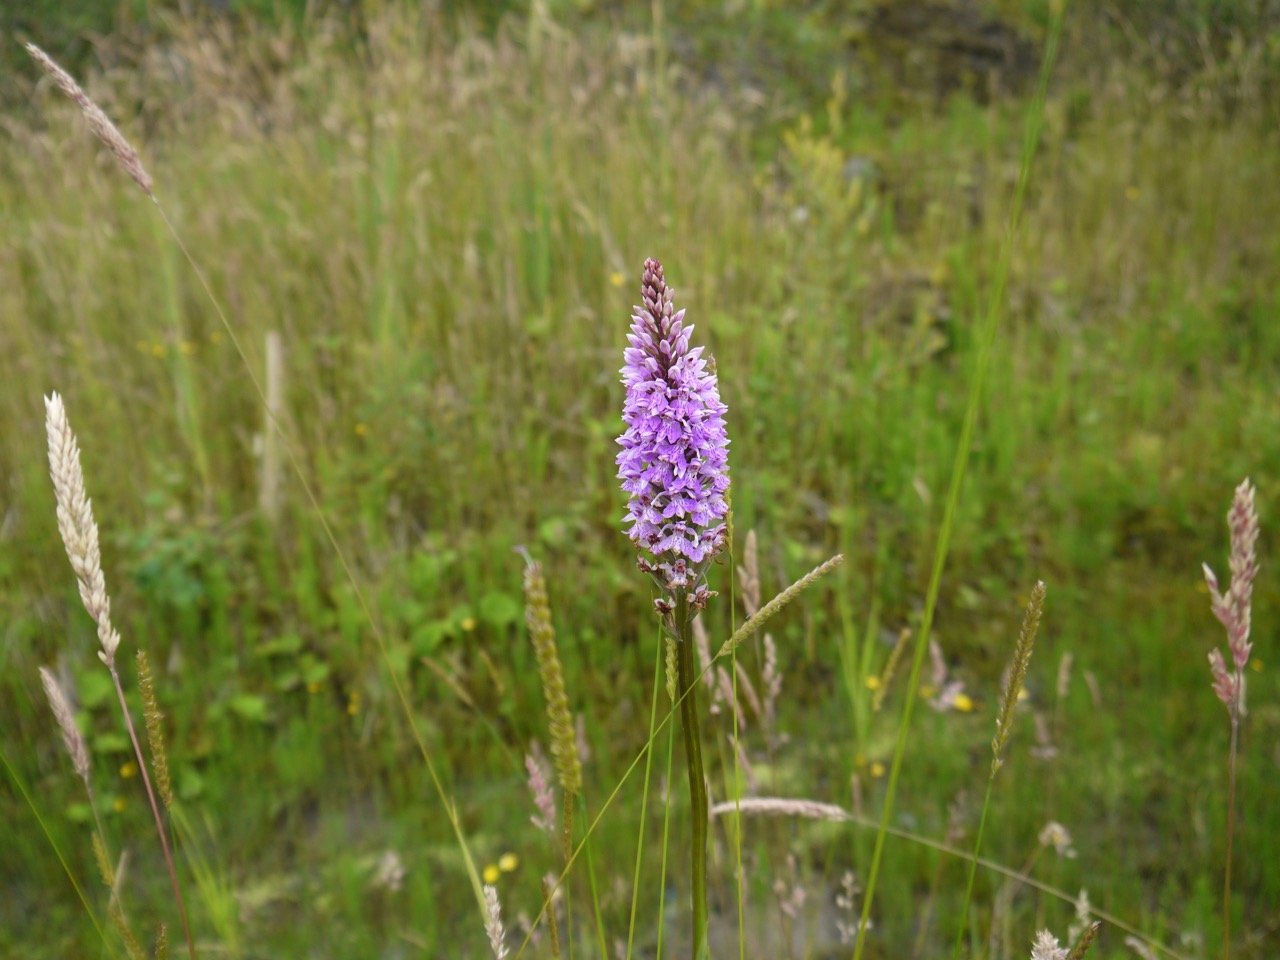 Spotted orchid